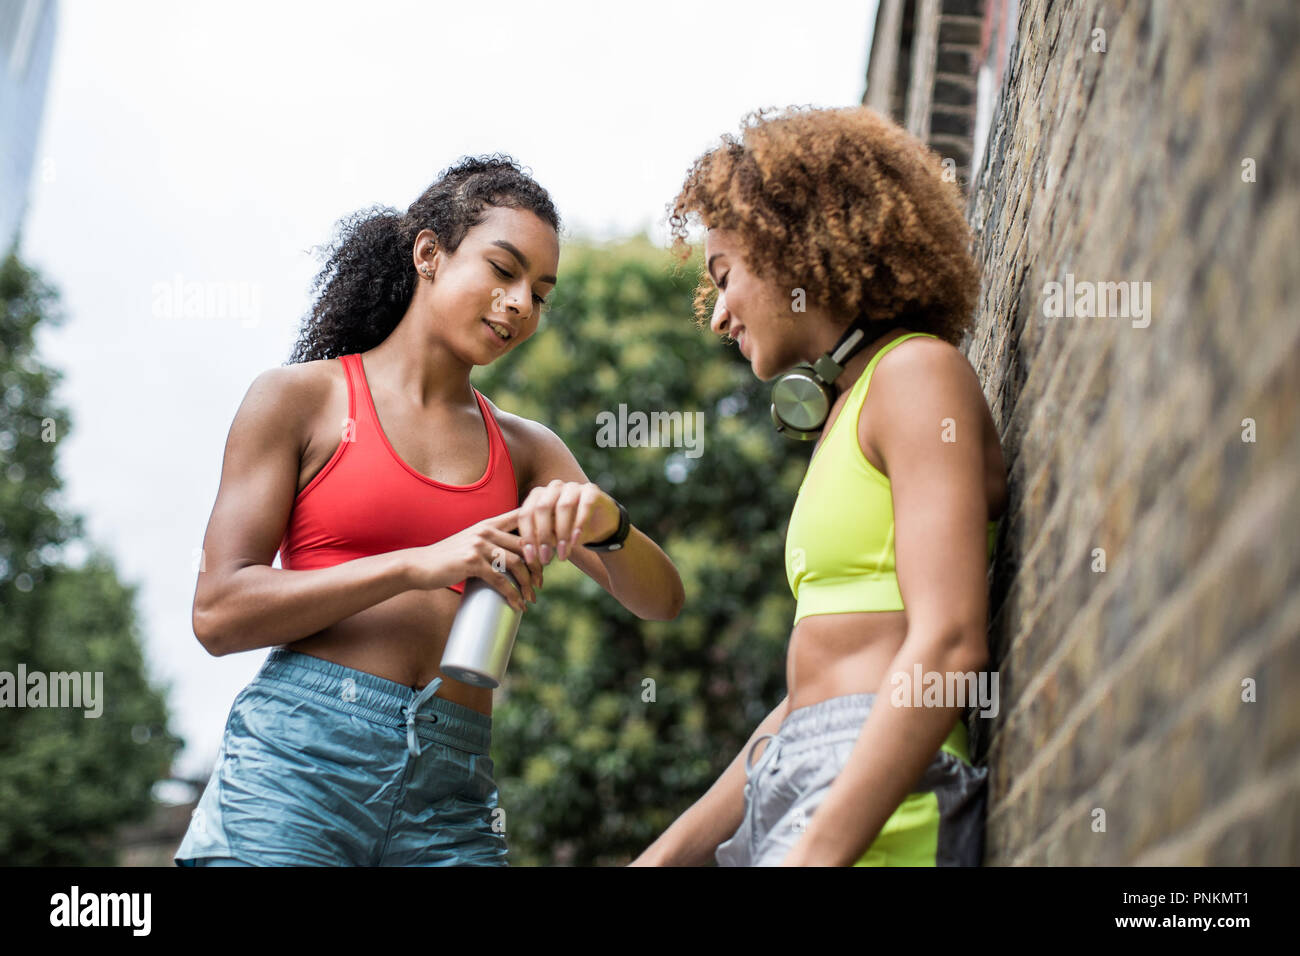 Young adult females taking a break on a run in urban city Stock Photo